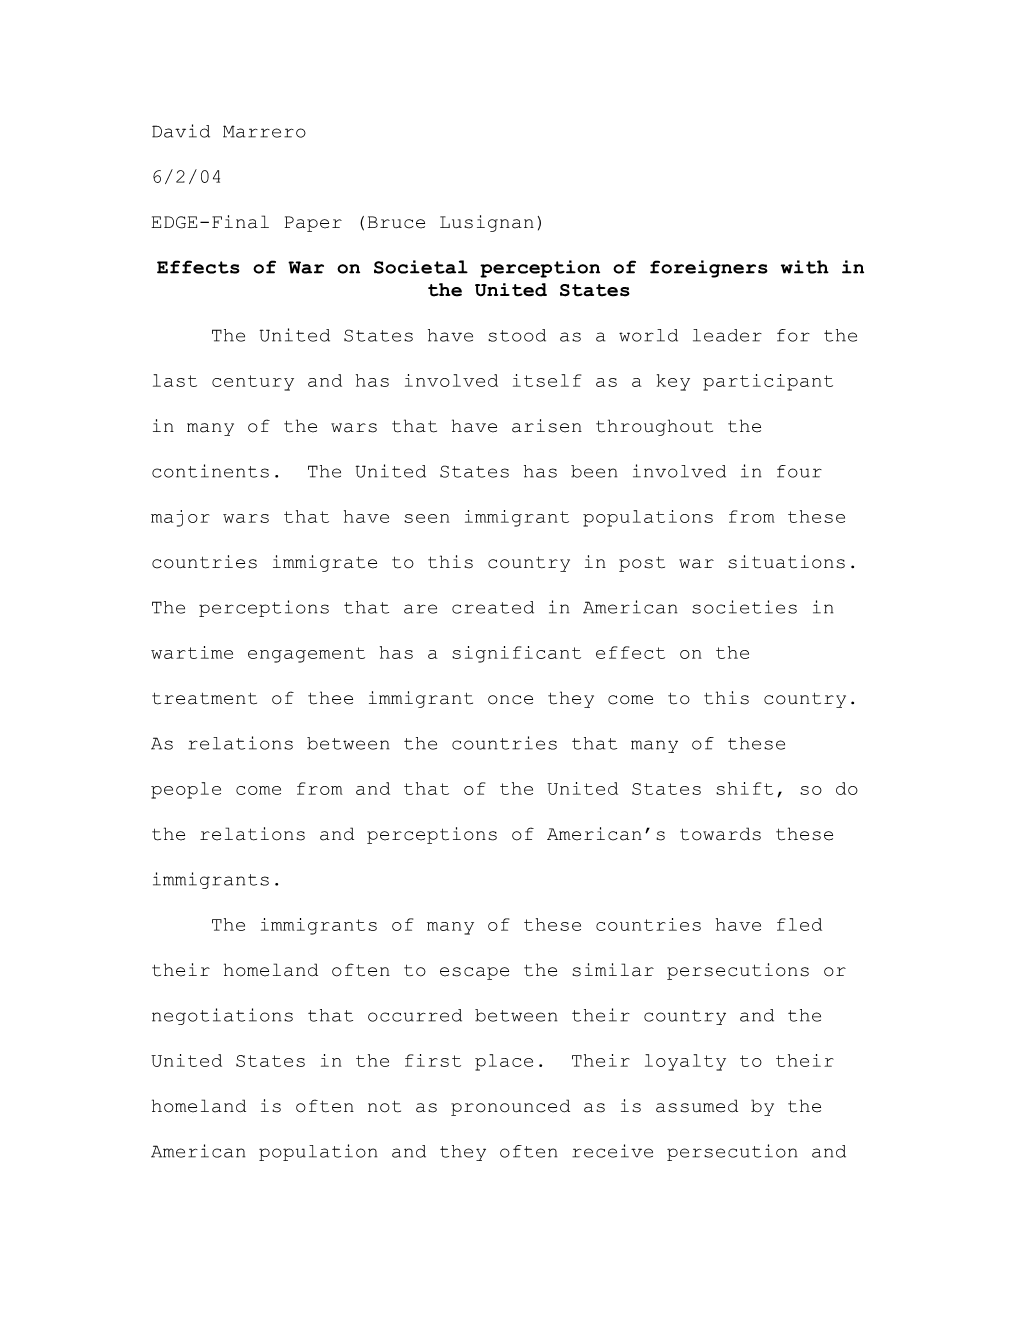 Effects of War on Societal Perception of Foreigners with in the United States